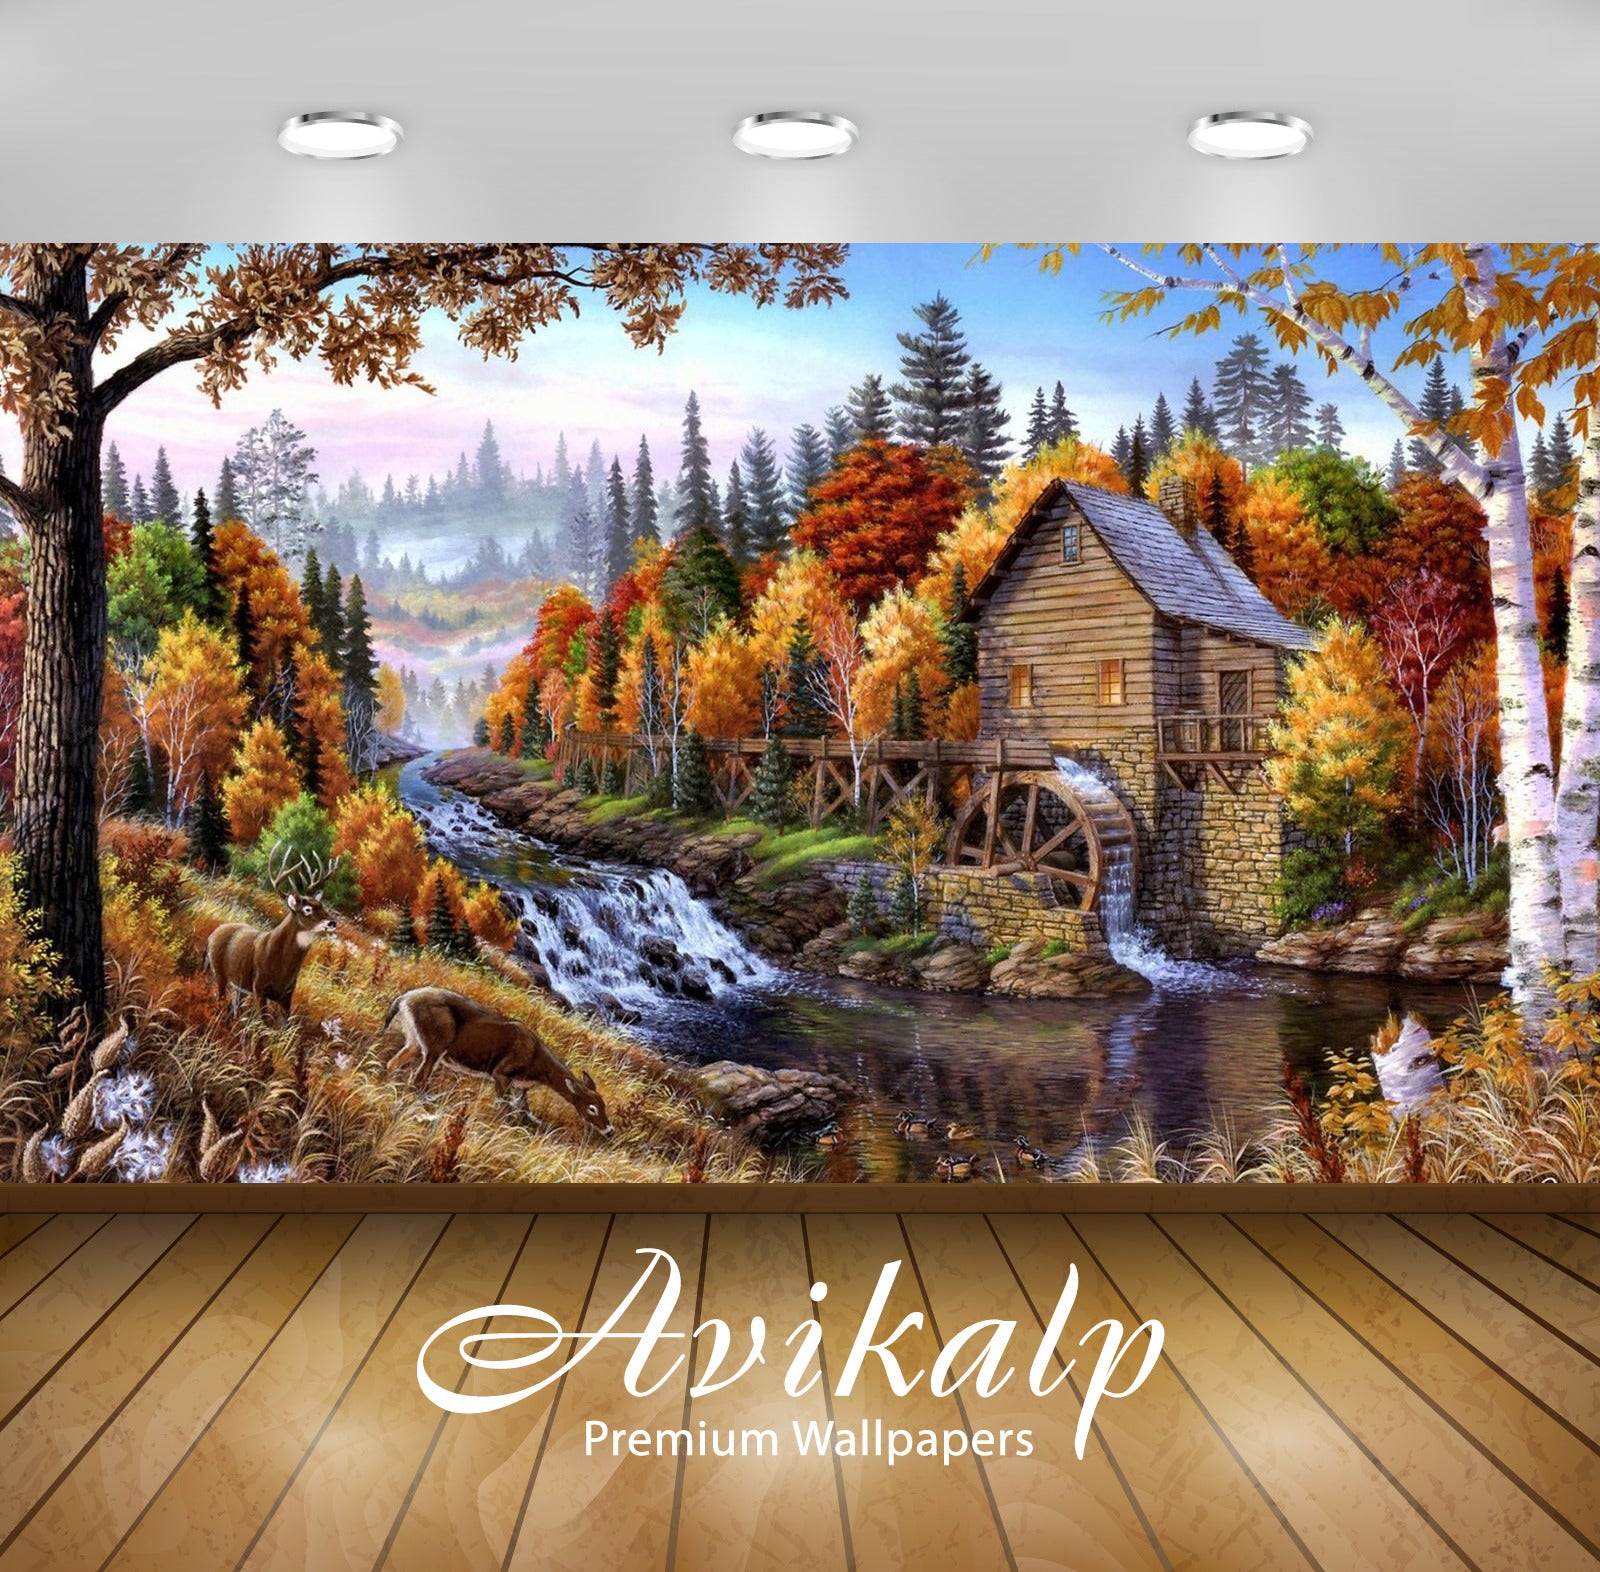 Avikalp Exclusive Awi2613 Fall Mill Wooden Mountain River Waterfall Forest With Pine Trees Deer Art